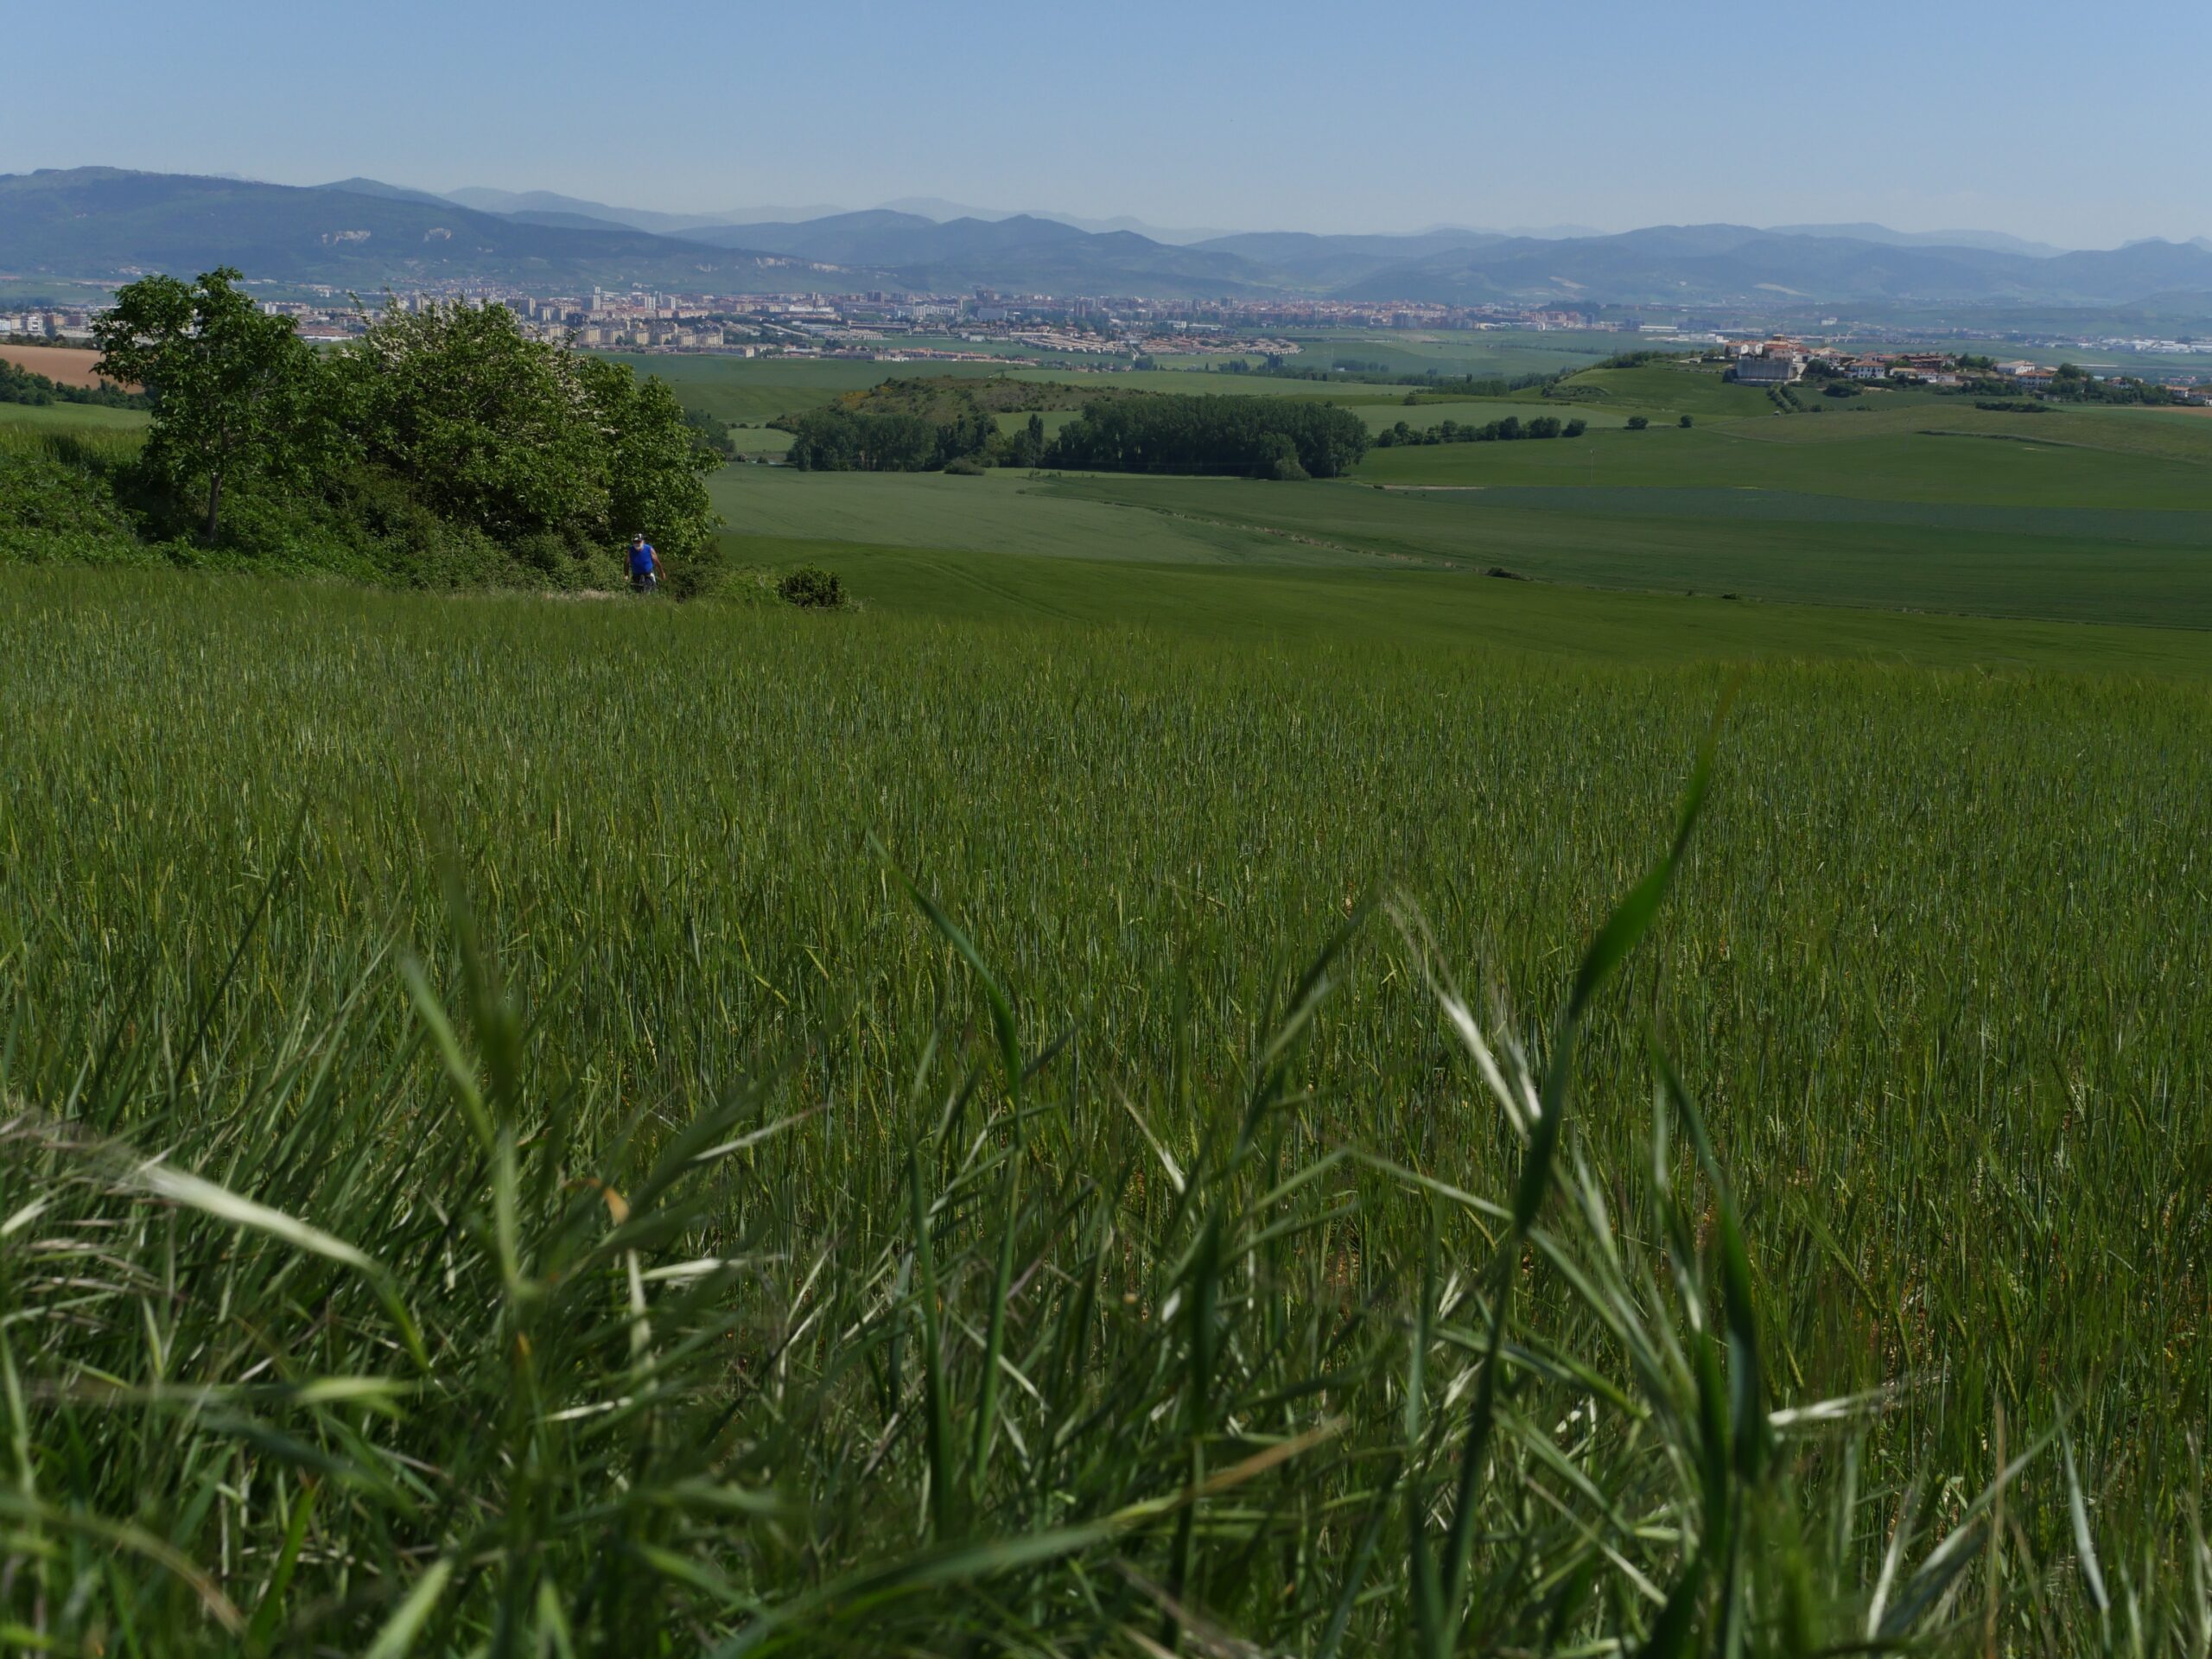 Pamplona, the largest city on the Camino de Santiago, is surrounded by fields of wheat.